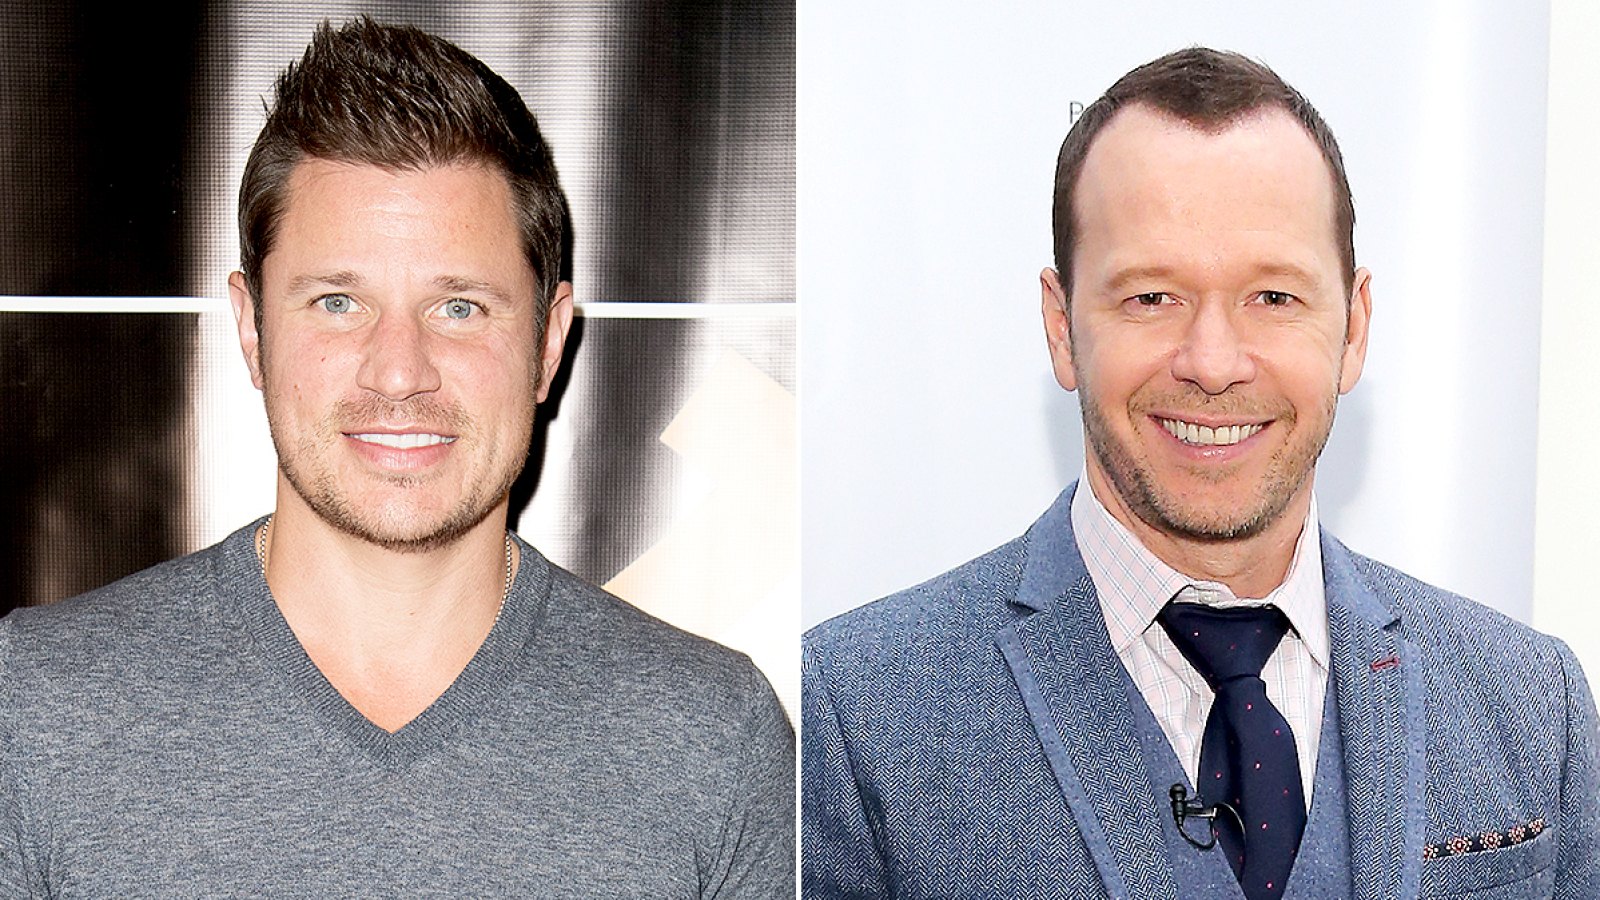 Nick Lachey and Donnie Wahlberg